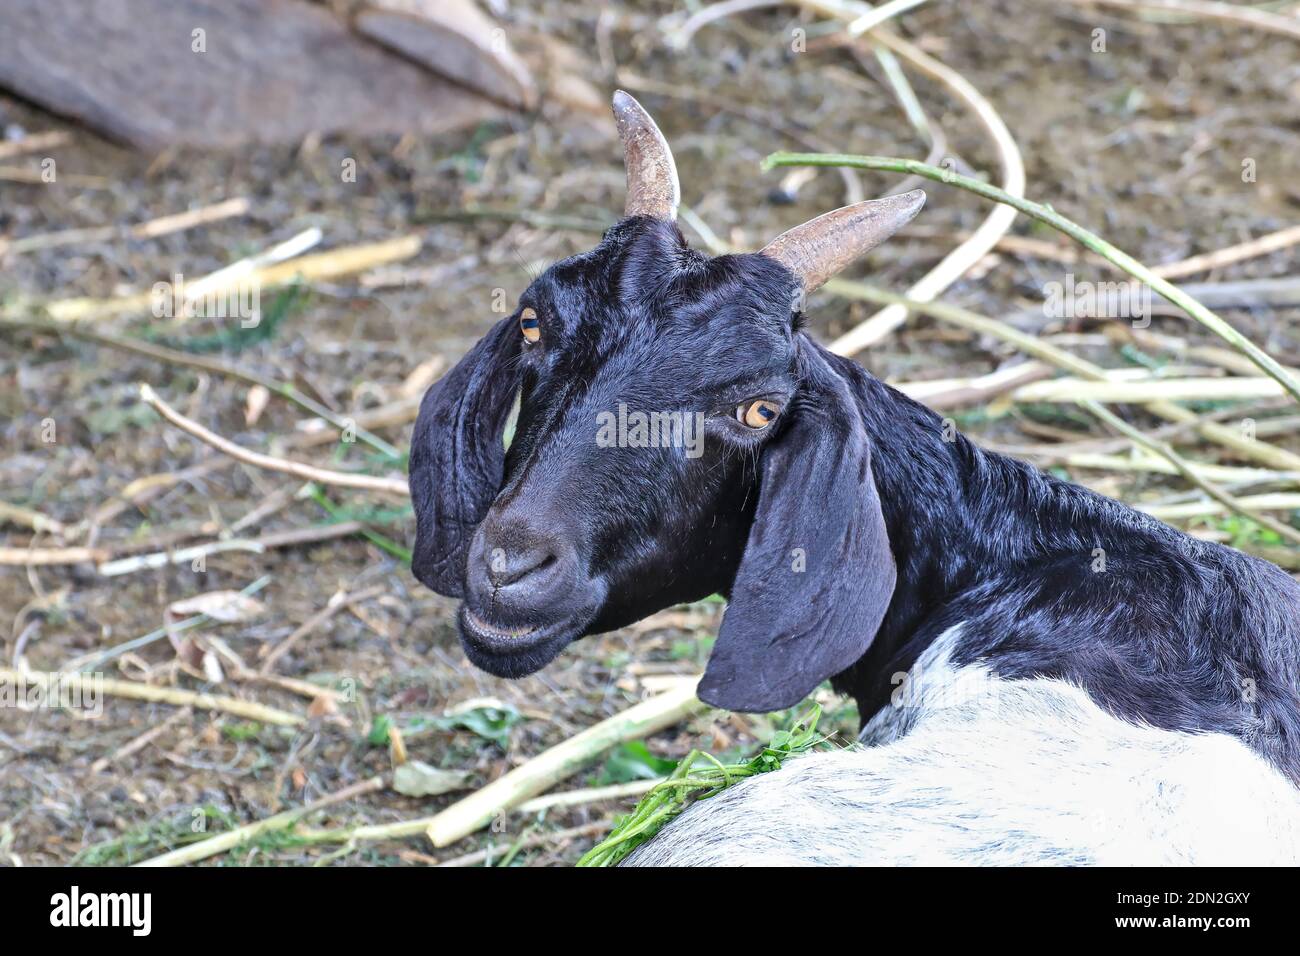 The black goat tilted its neck and looked at the noise from behind. Stock Photo